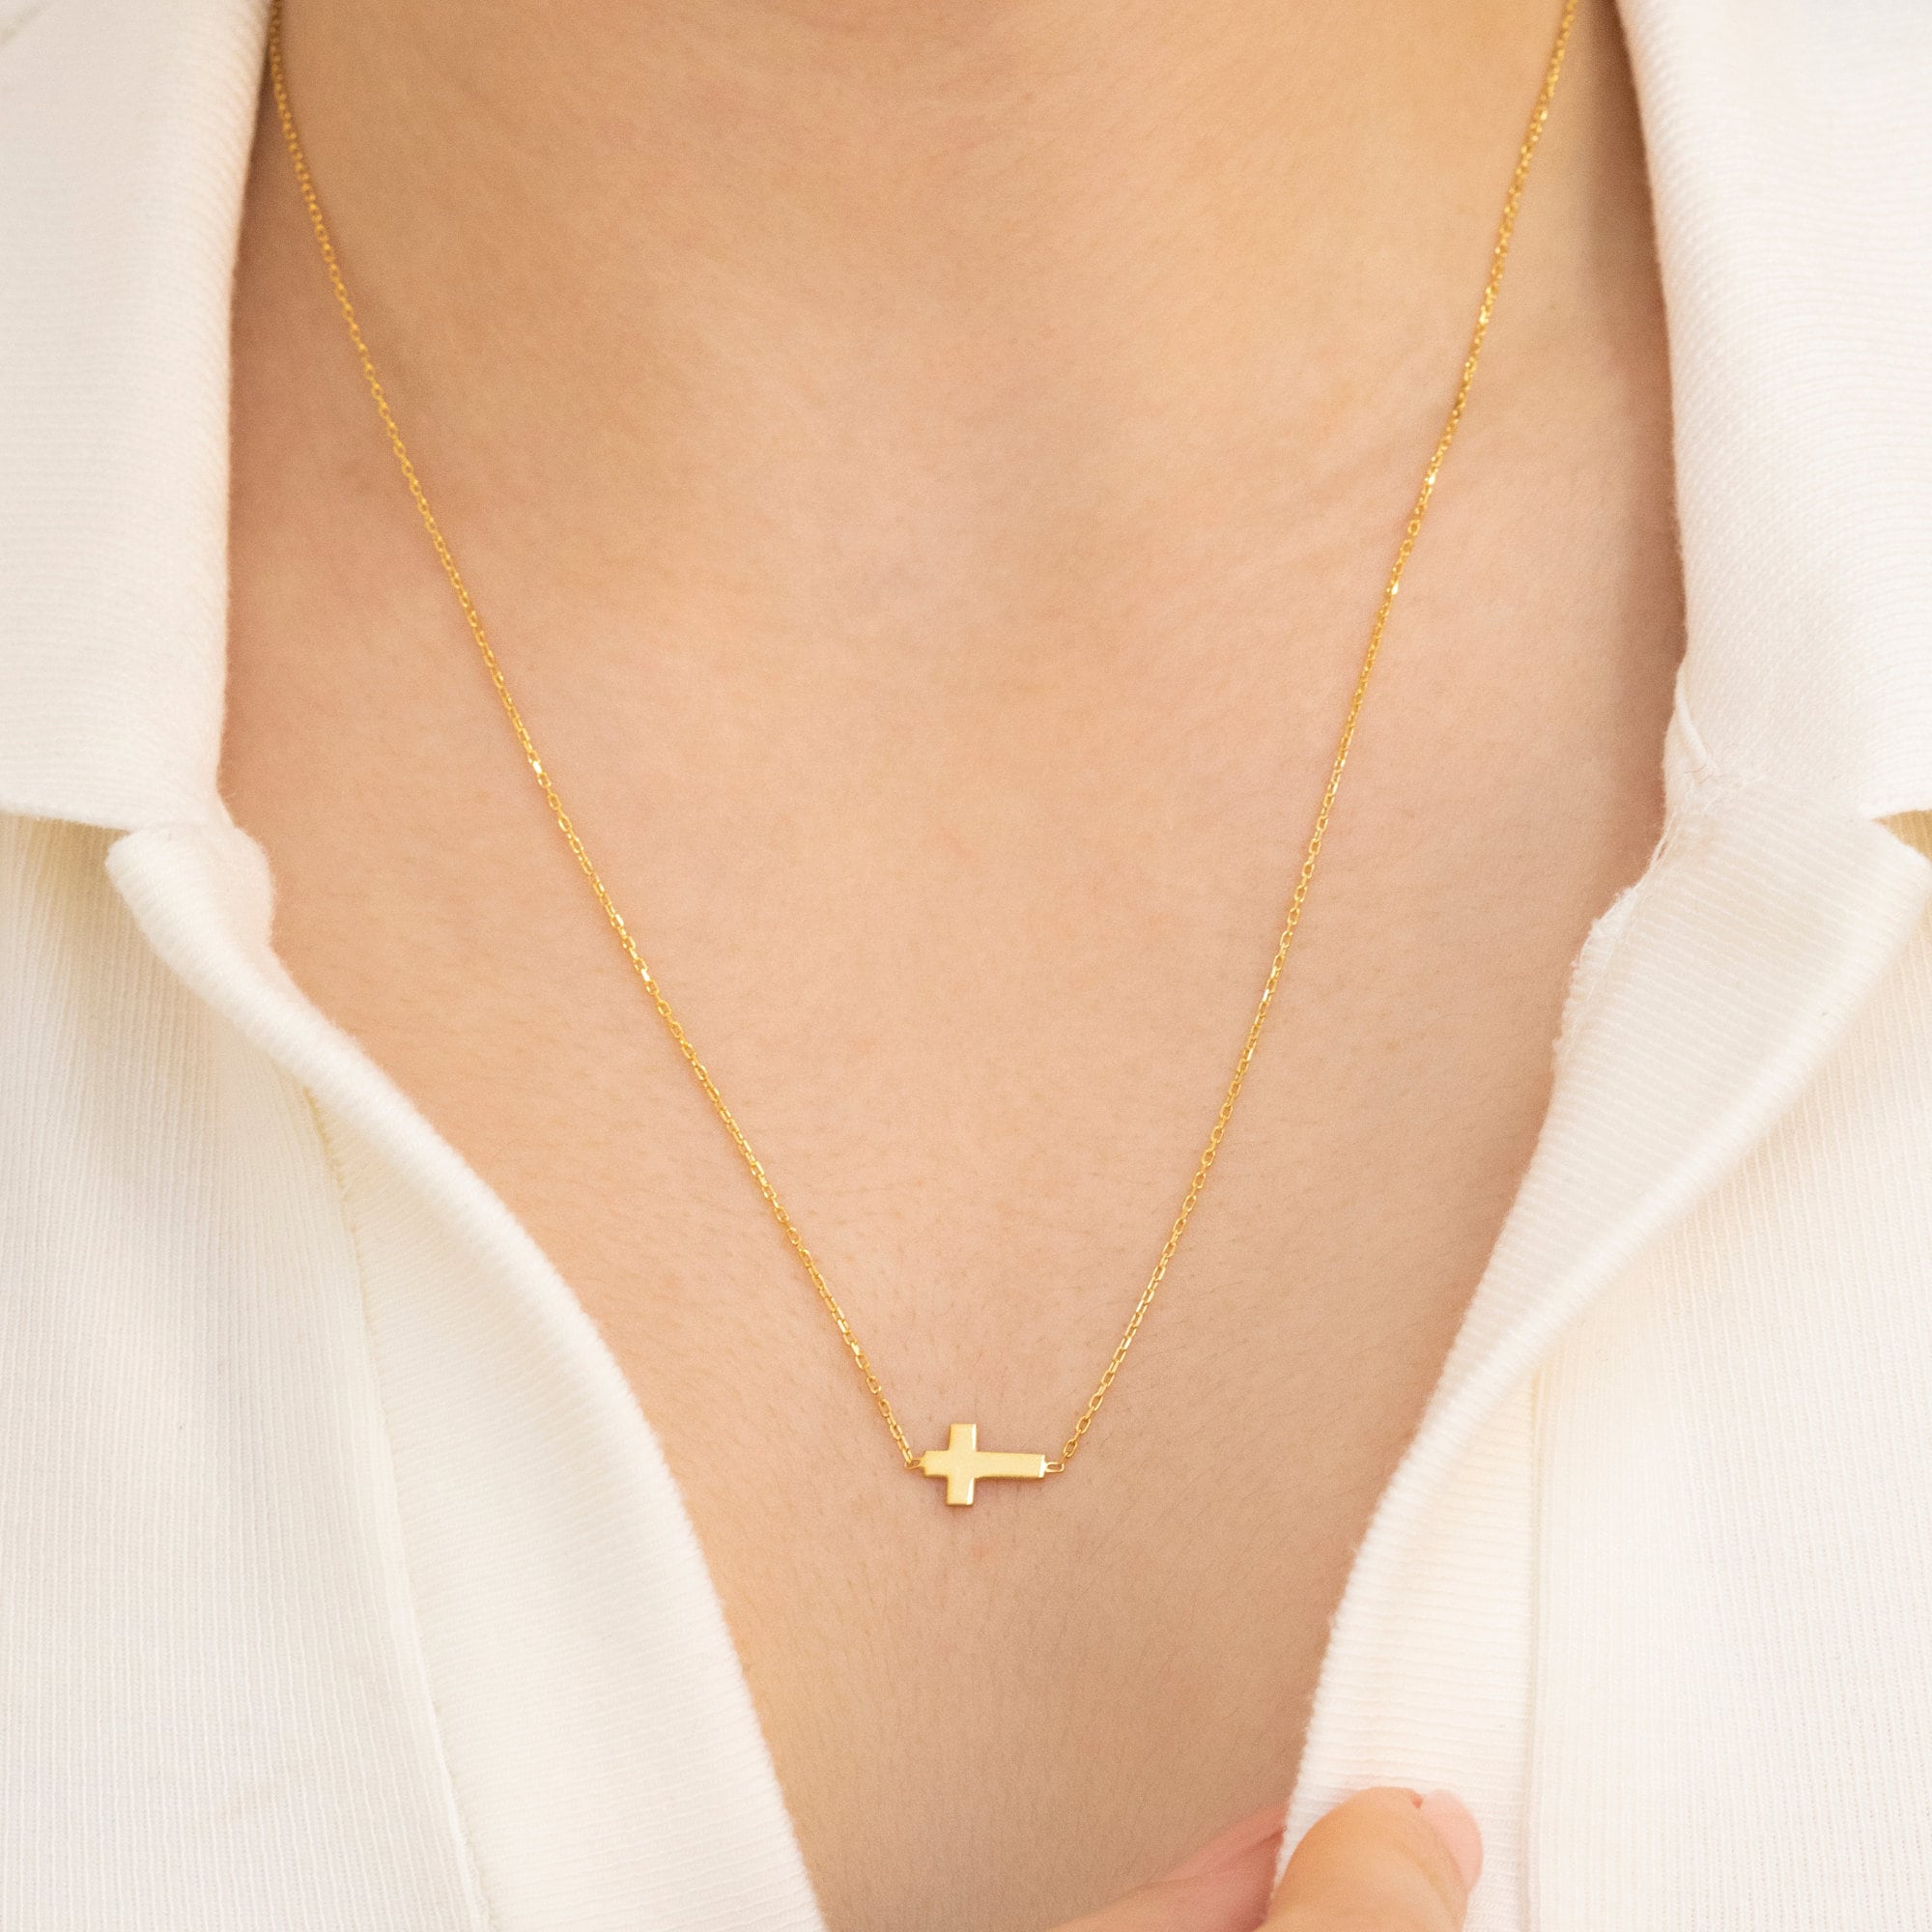 Sideways Cross Necklace, Dainty Cross Necklace for Women, Gold Cross  Necklace, Mother\'s Day Gift, Christmas Gift for Her - Etsy